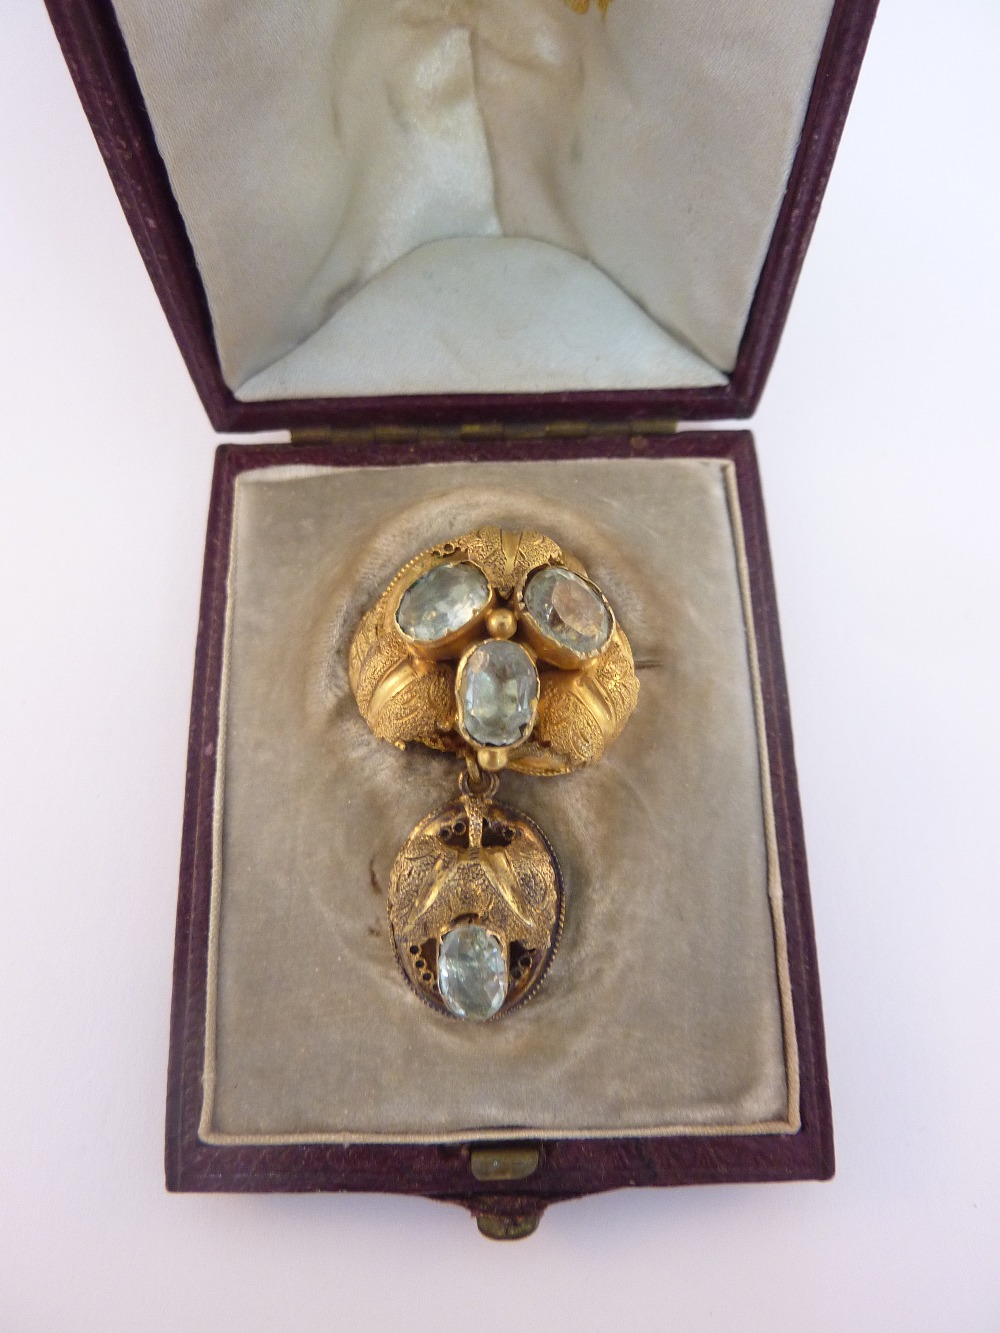 AN EARLY 20TH CENTURY BROOCH, designed as three oval shape aquamarines surrounded by blooming